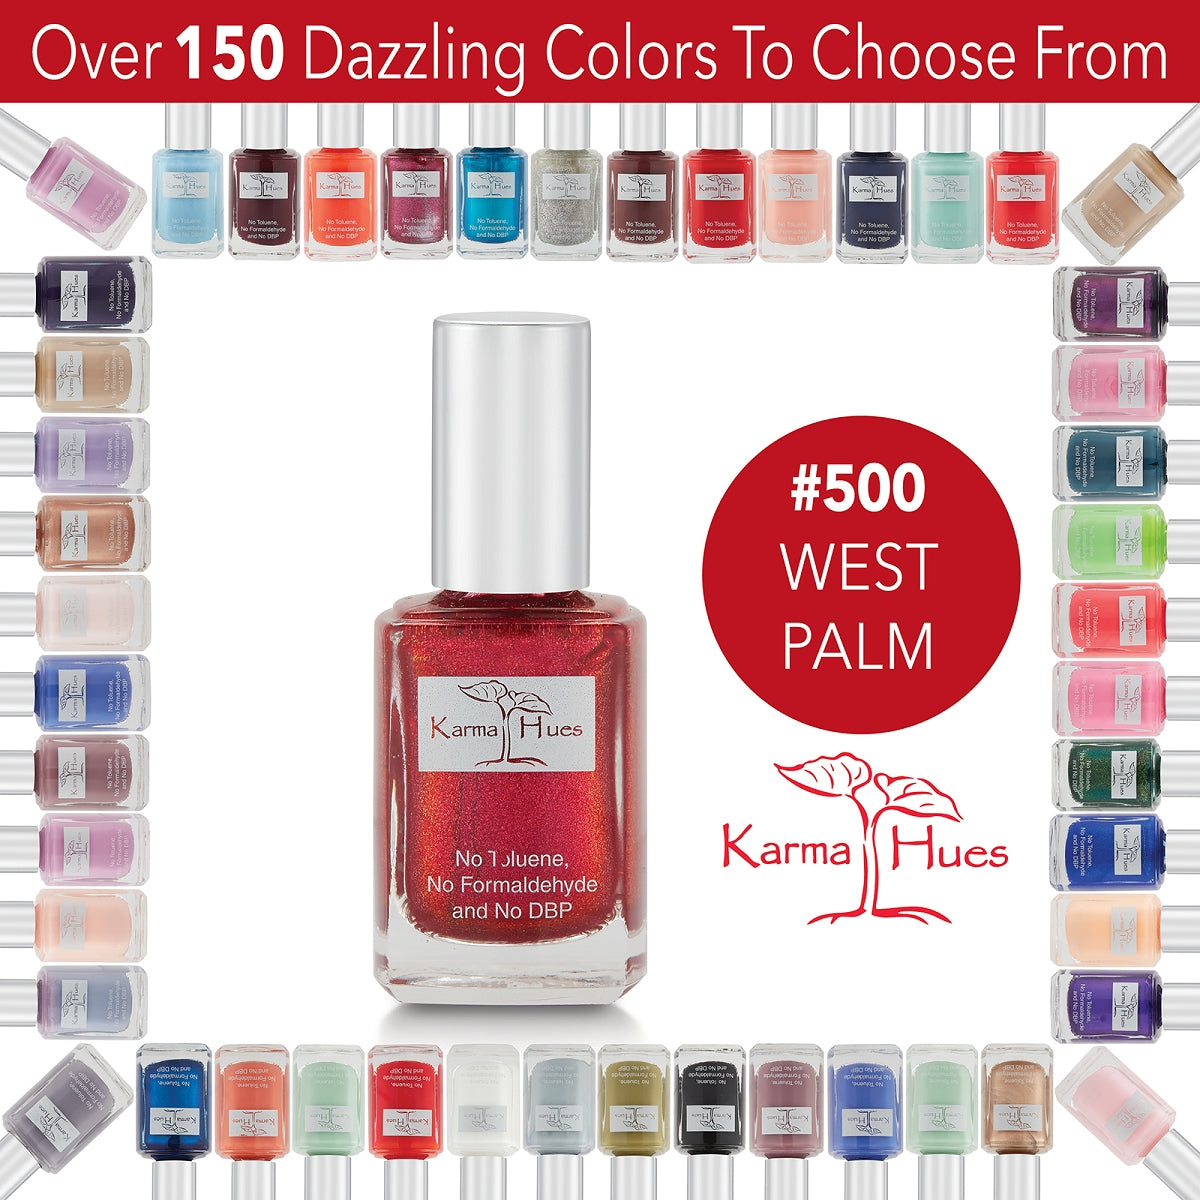 West Palm - Nail Polish; Non-Toxic, Vegan, and Cruelty-Free (#500)